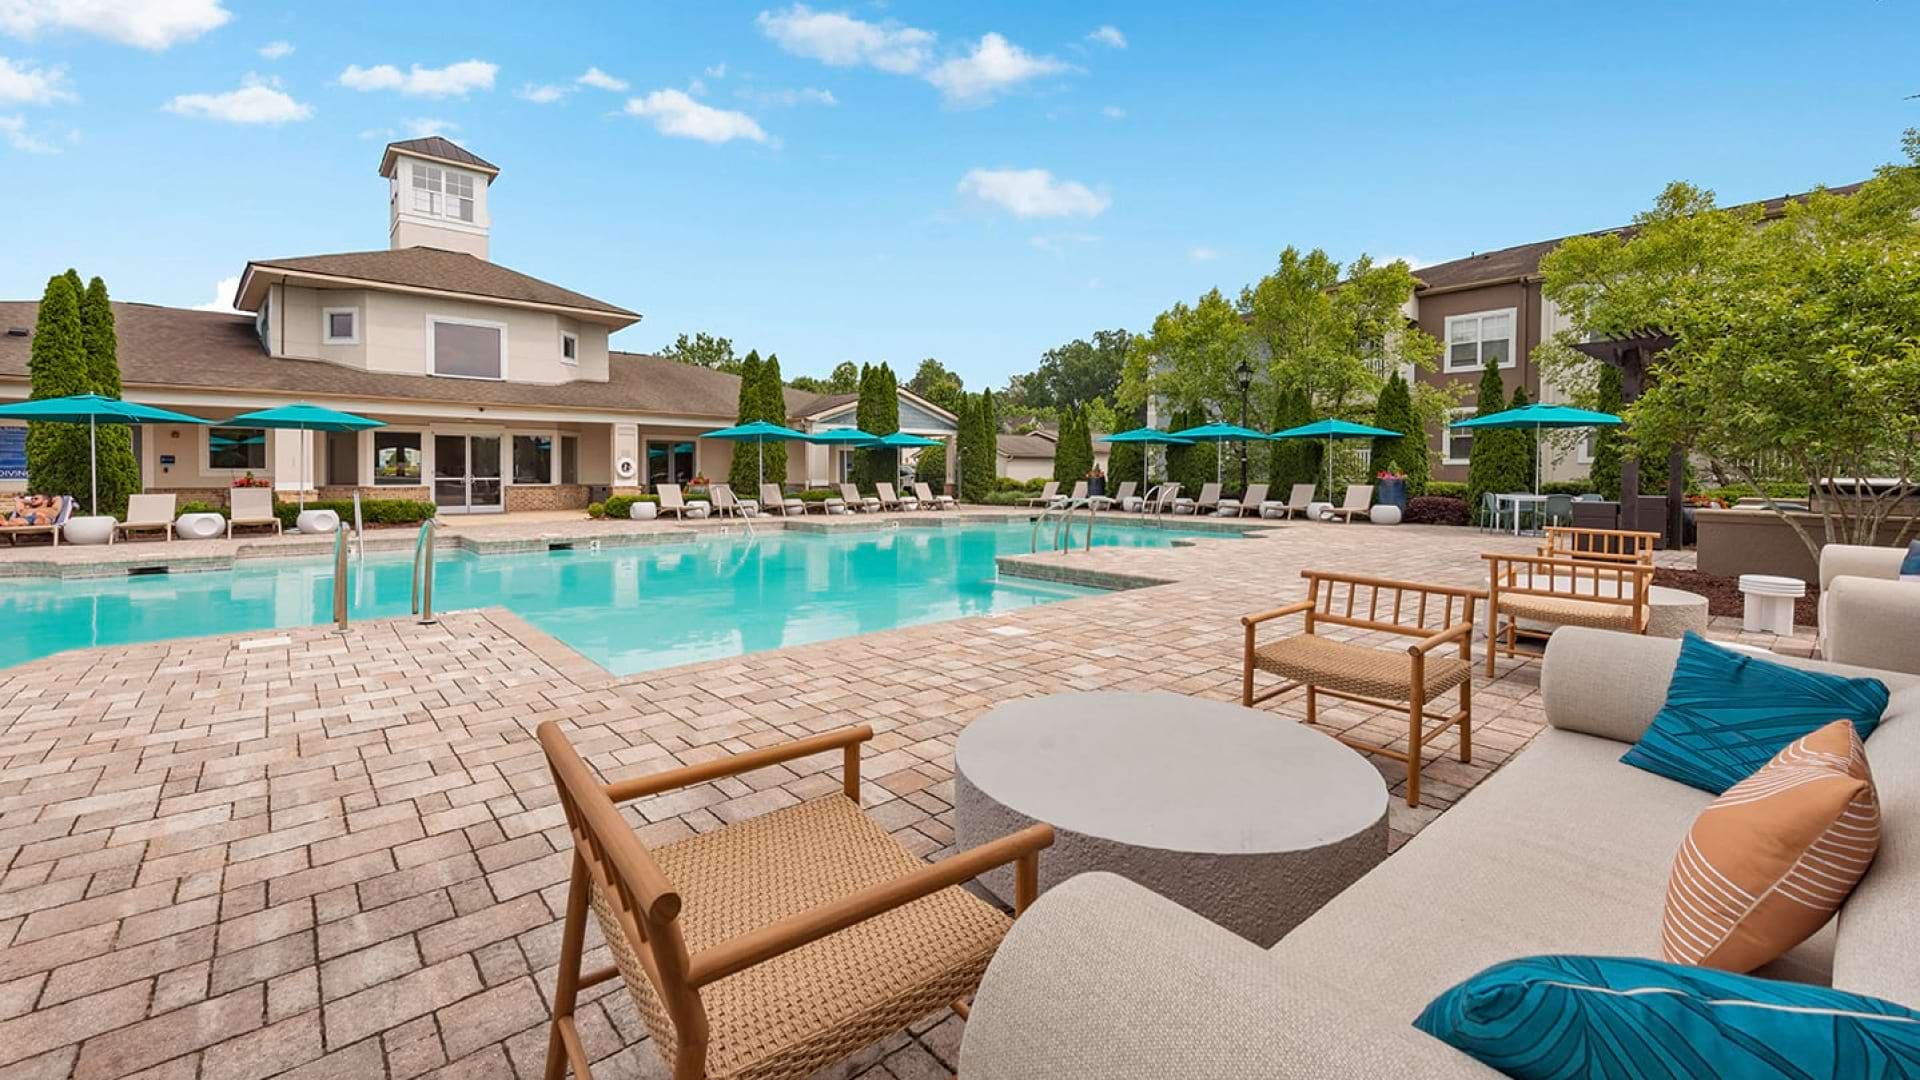 Apartments Near UNCC with Resort-Style Pool and Sun Deck 